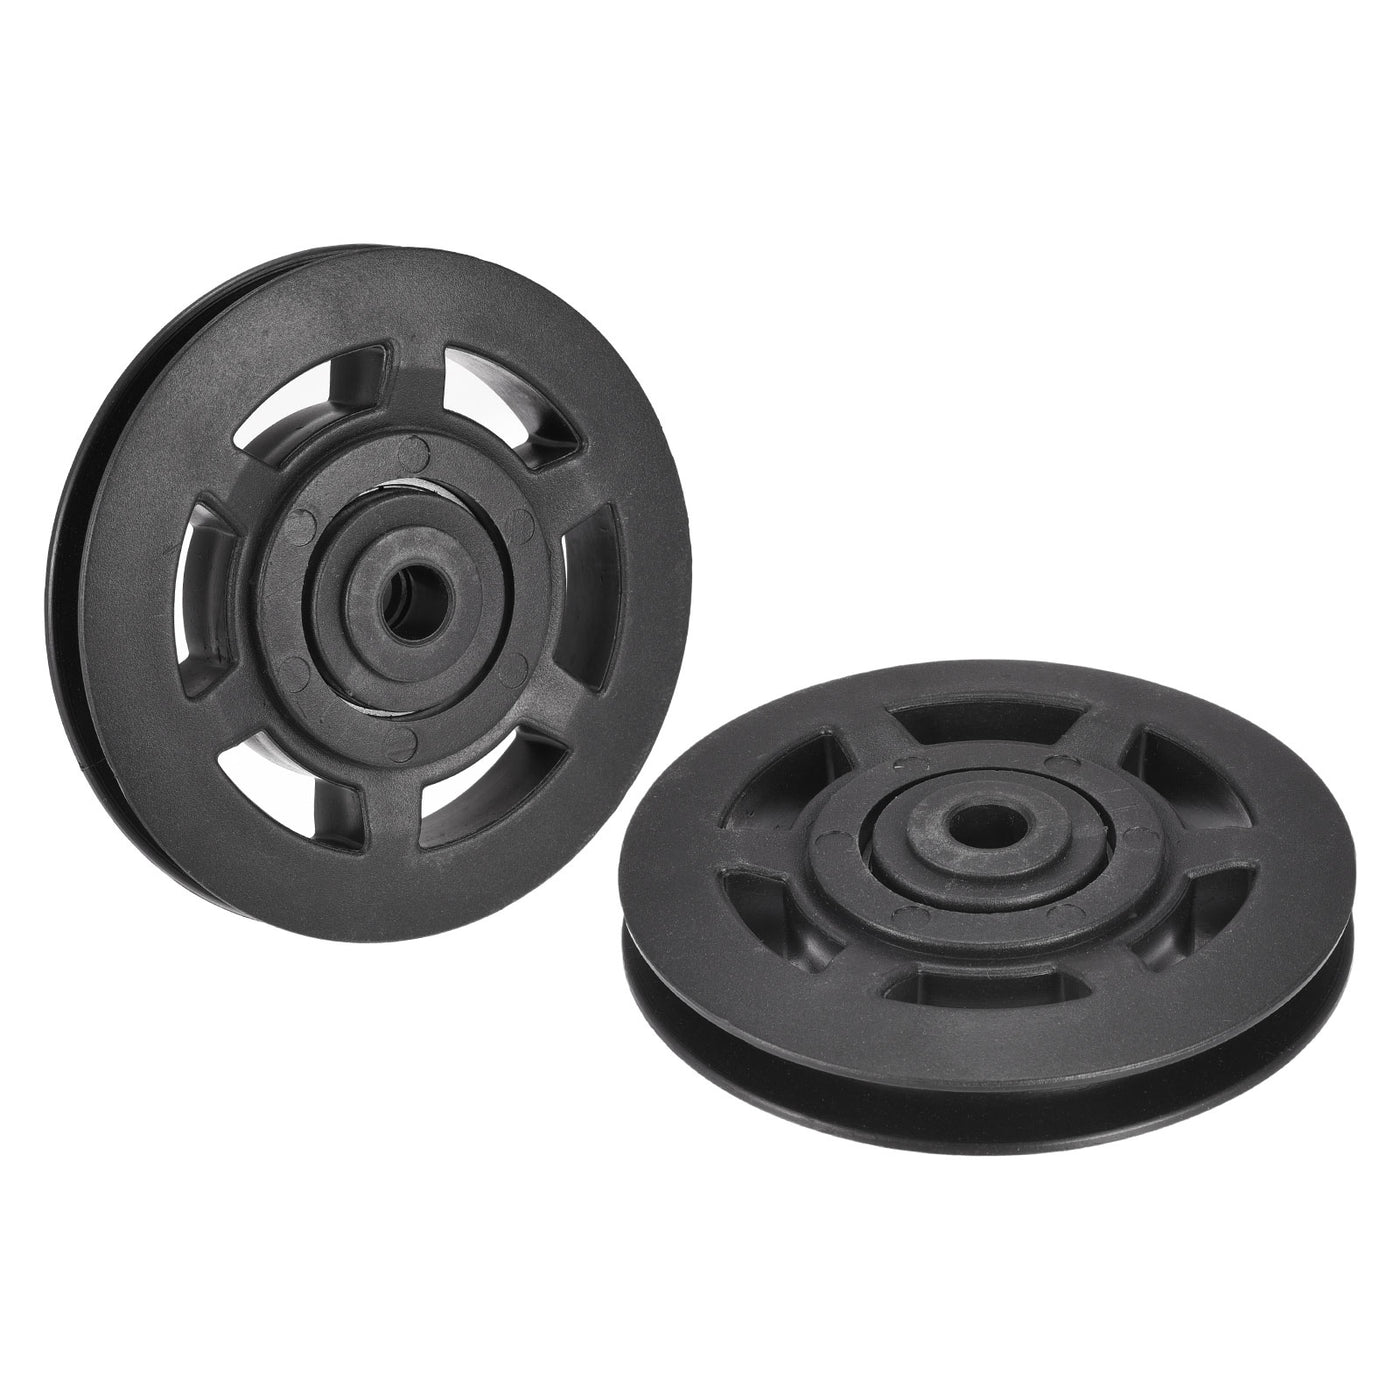 uxcell Uxcell 2pcs 96mm Bearing Pulley Wheel Cable Fitness Equipment Accessories